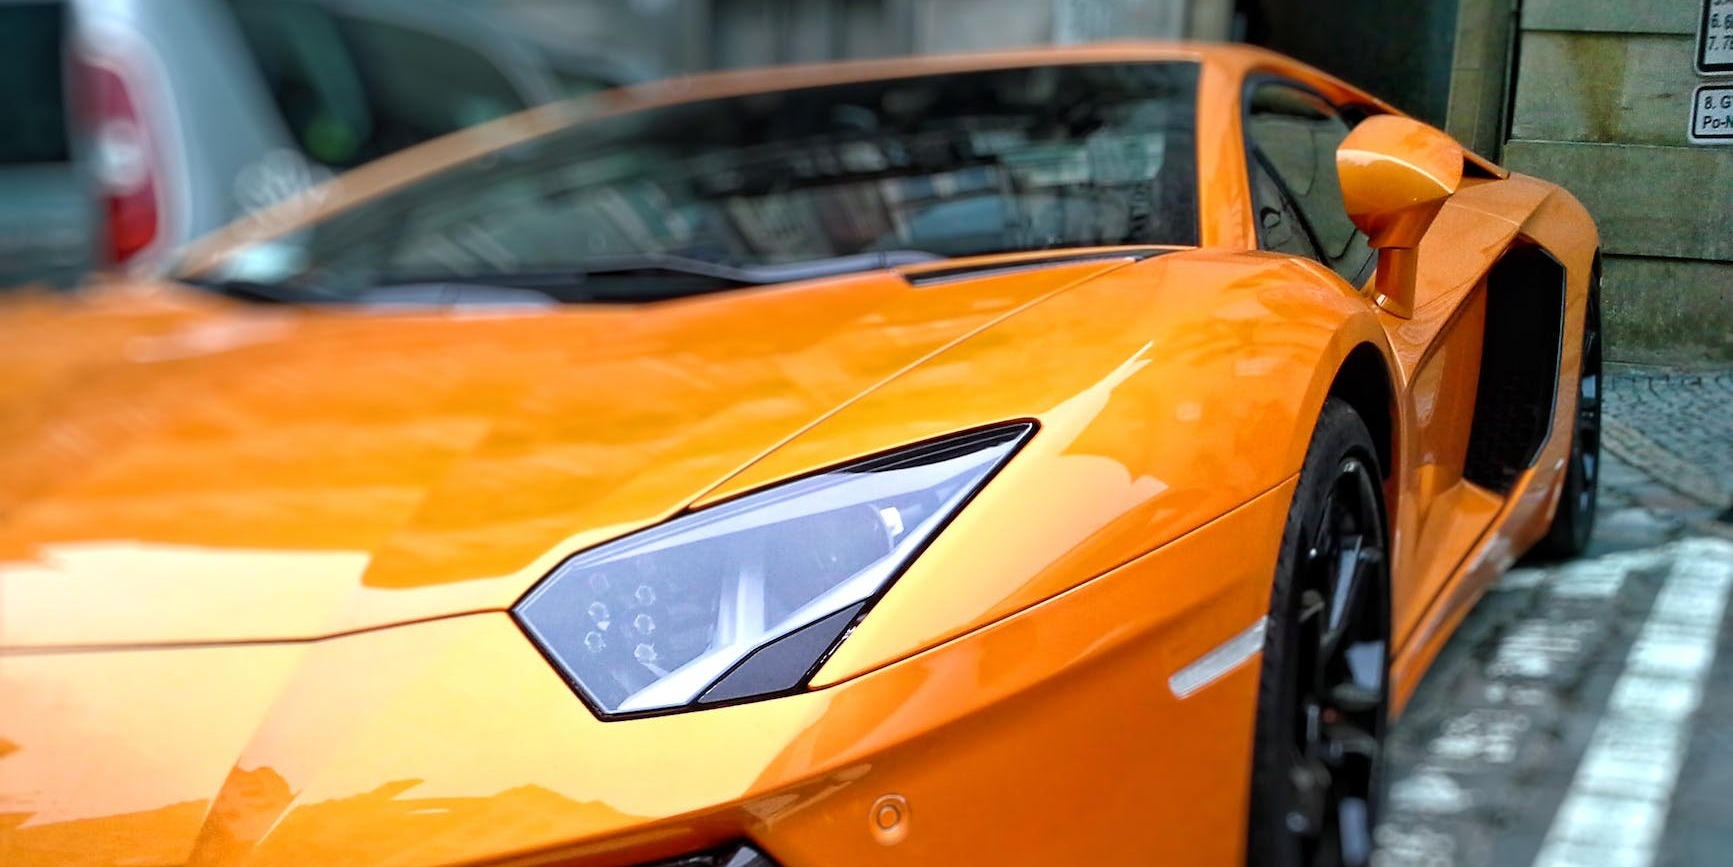 Planning a Special Occasion? Find Out Why a Lamborghini Hire is the UK's Ultimate Statement